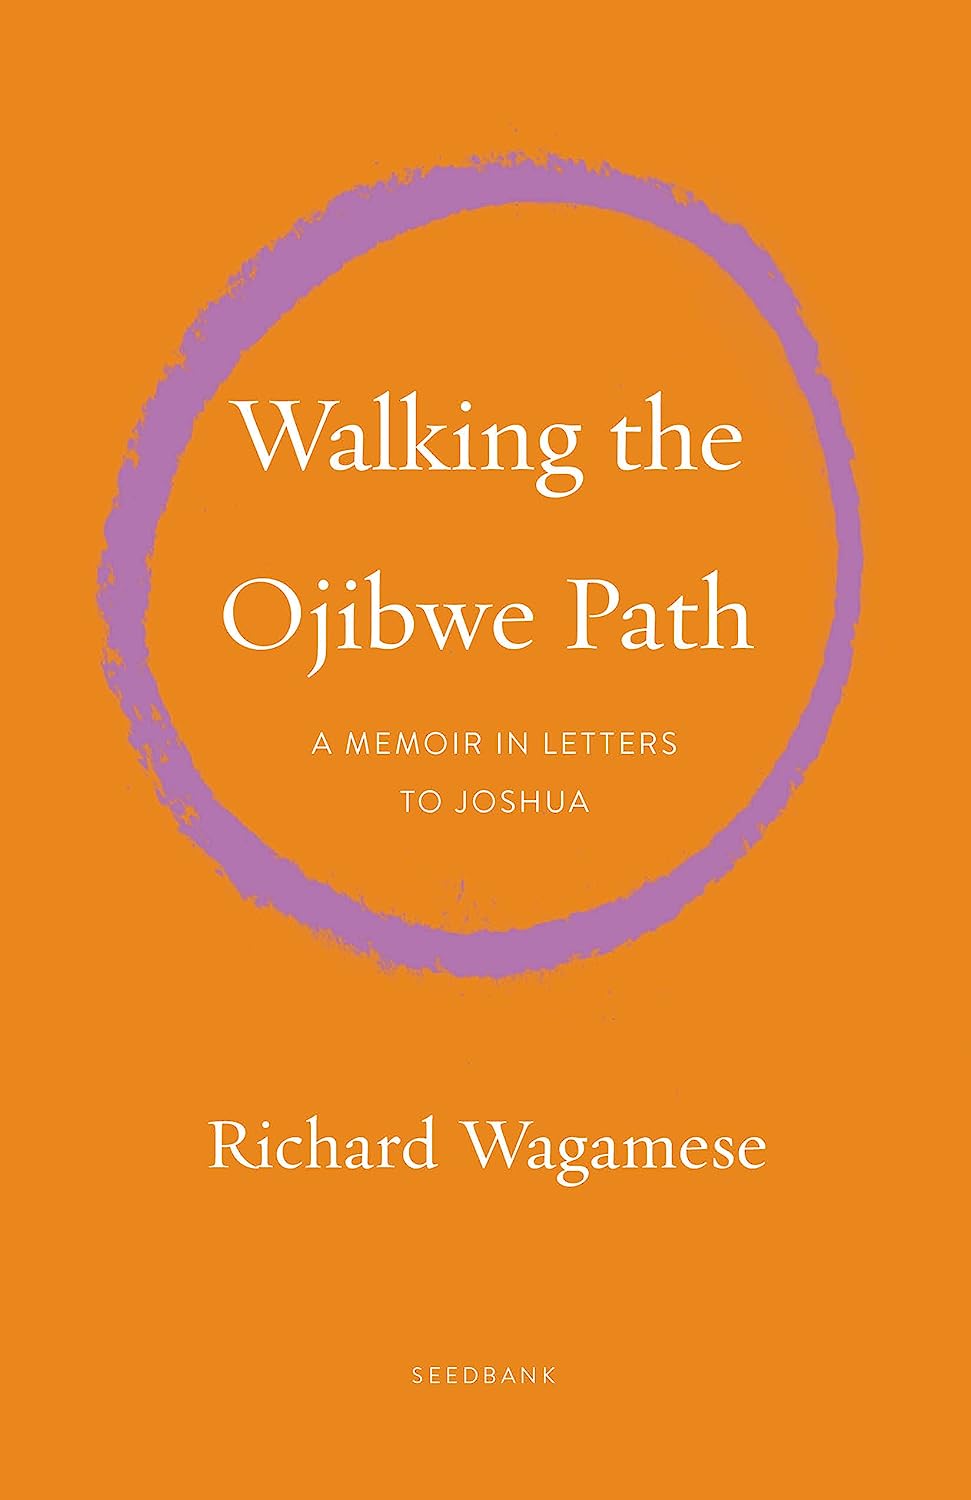 Walking the Ojibwe Path: A Memoir in Letters to Joshua by Richard Wagamese